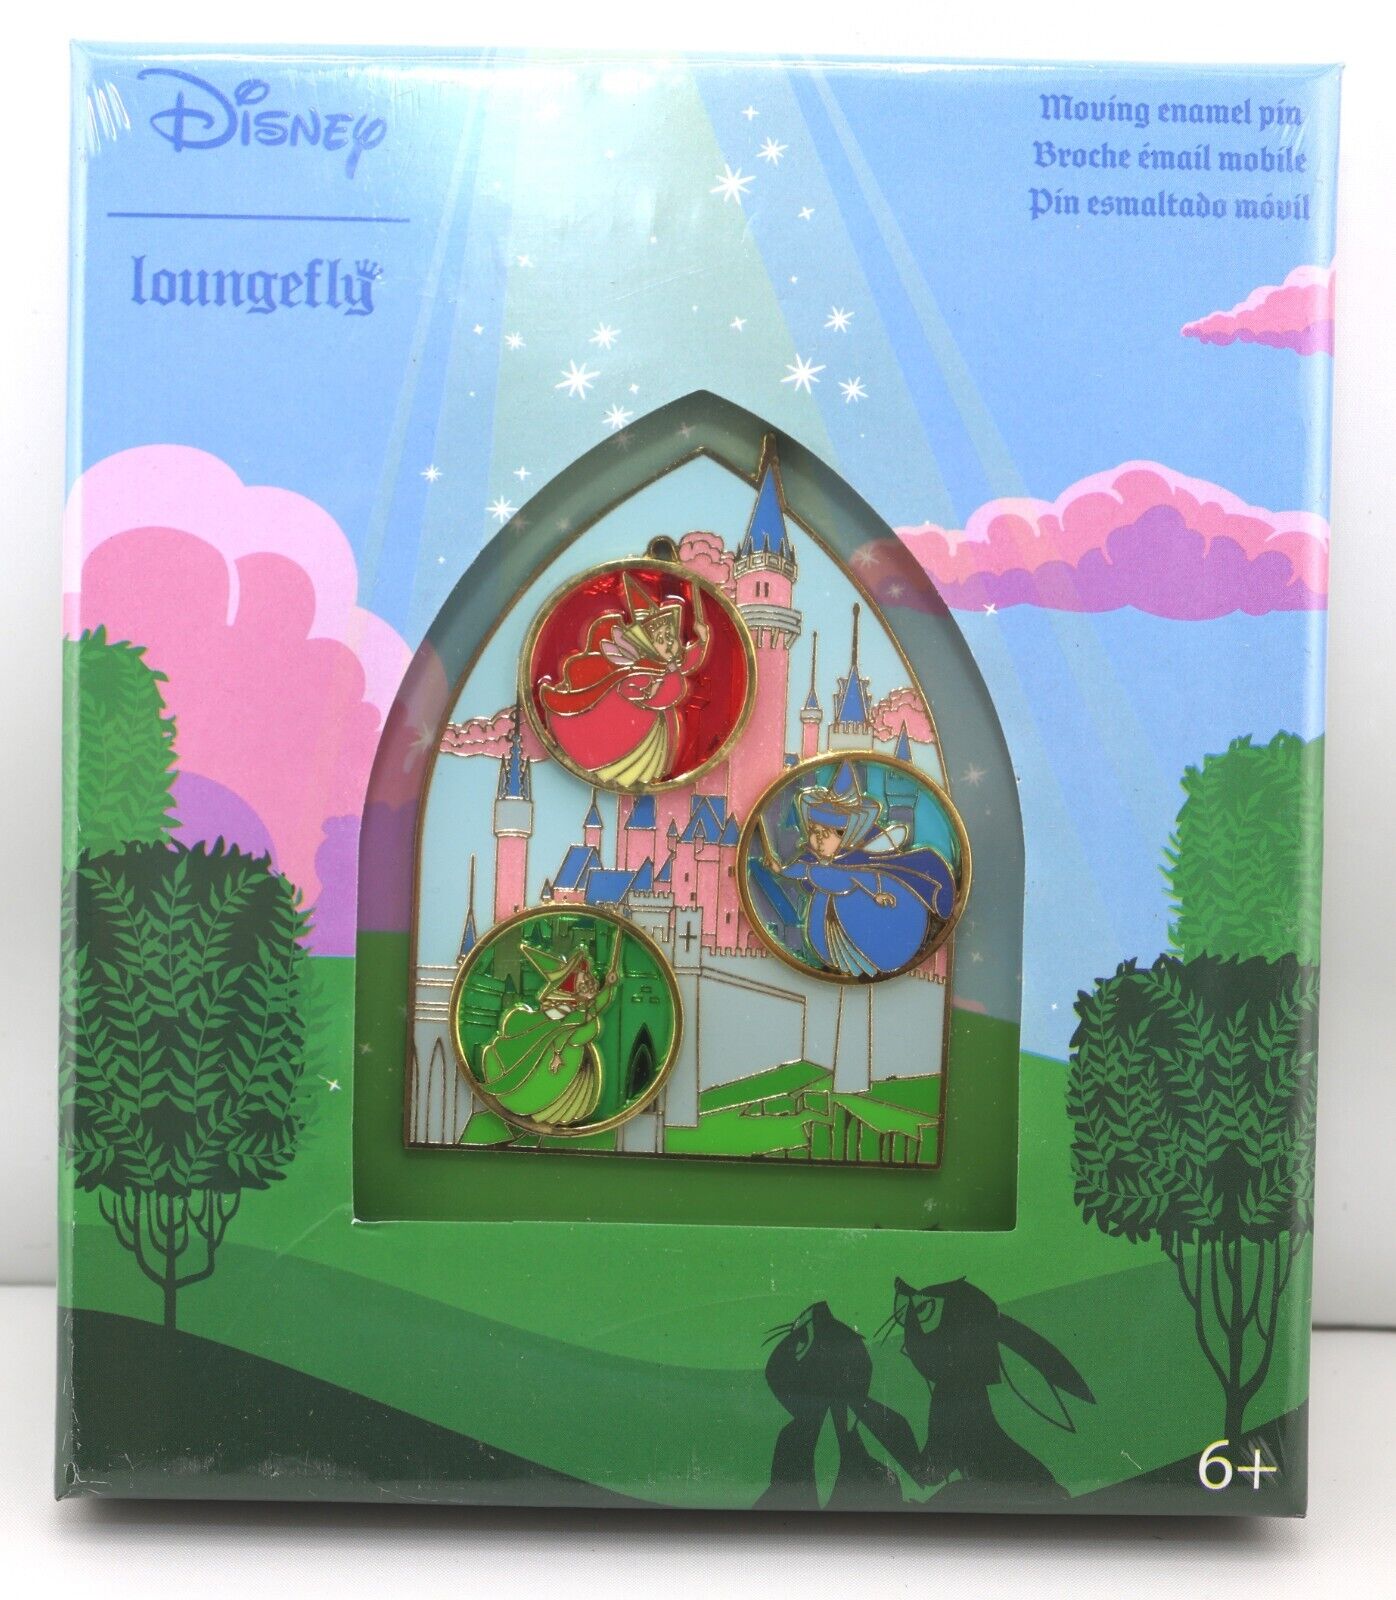 Loungefly Disney Sleeping Beauty Three Fairies Stained Glass Slider LE 1900 Pin